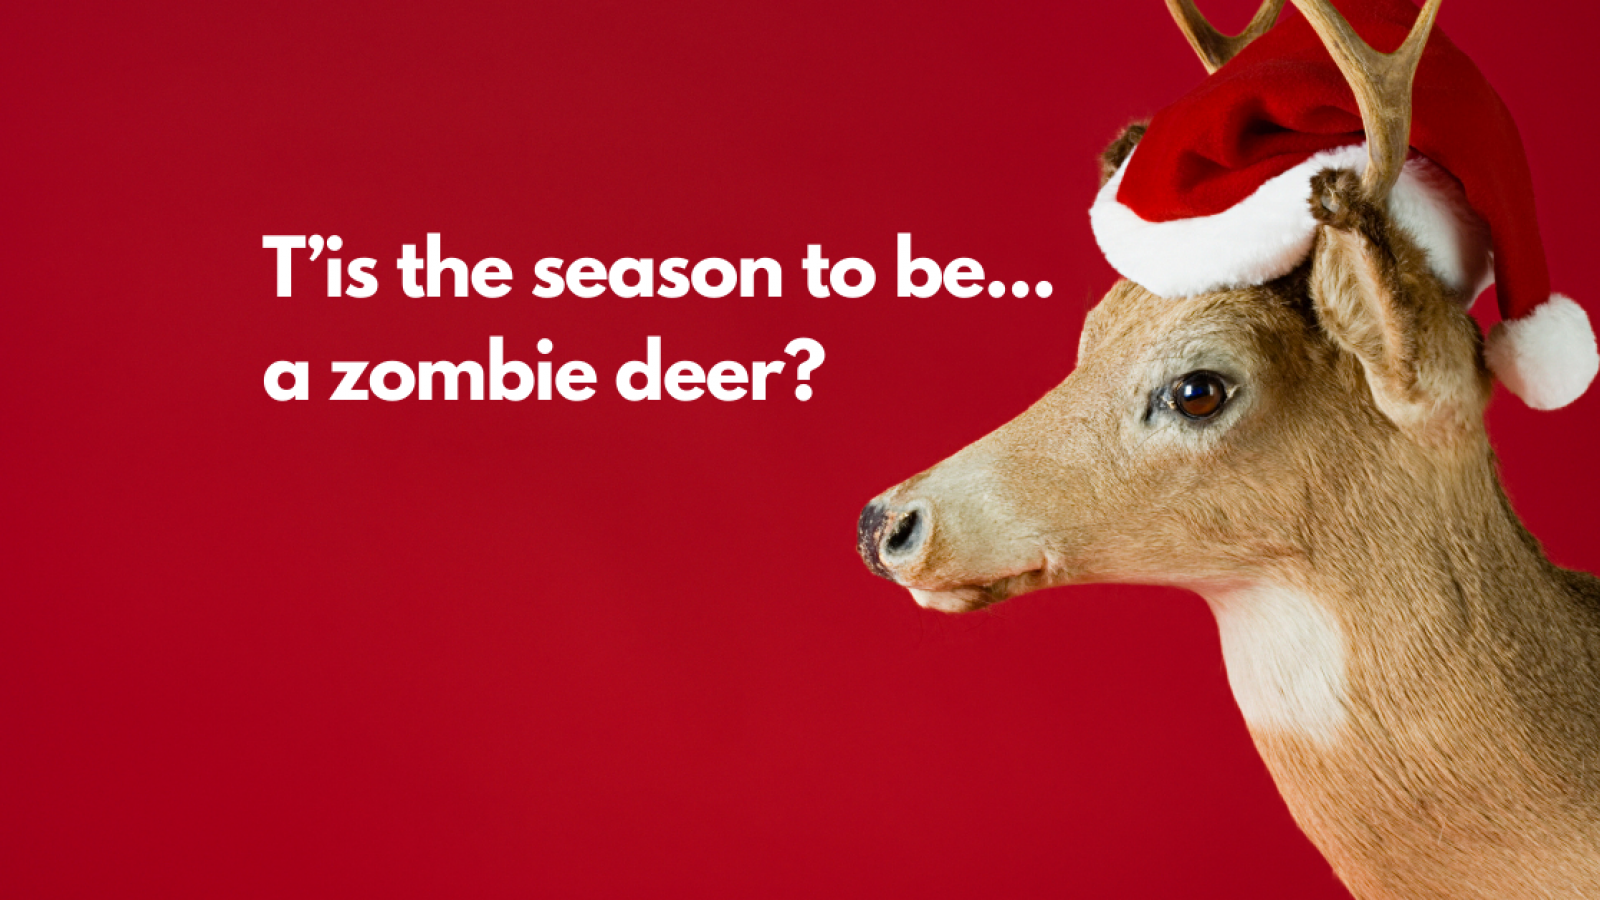 T'is the season to be ... a zombie deer?